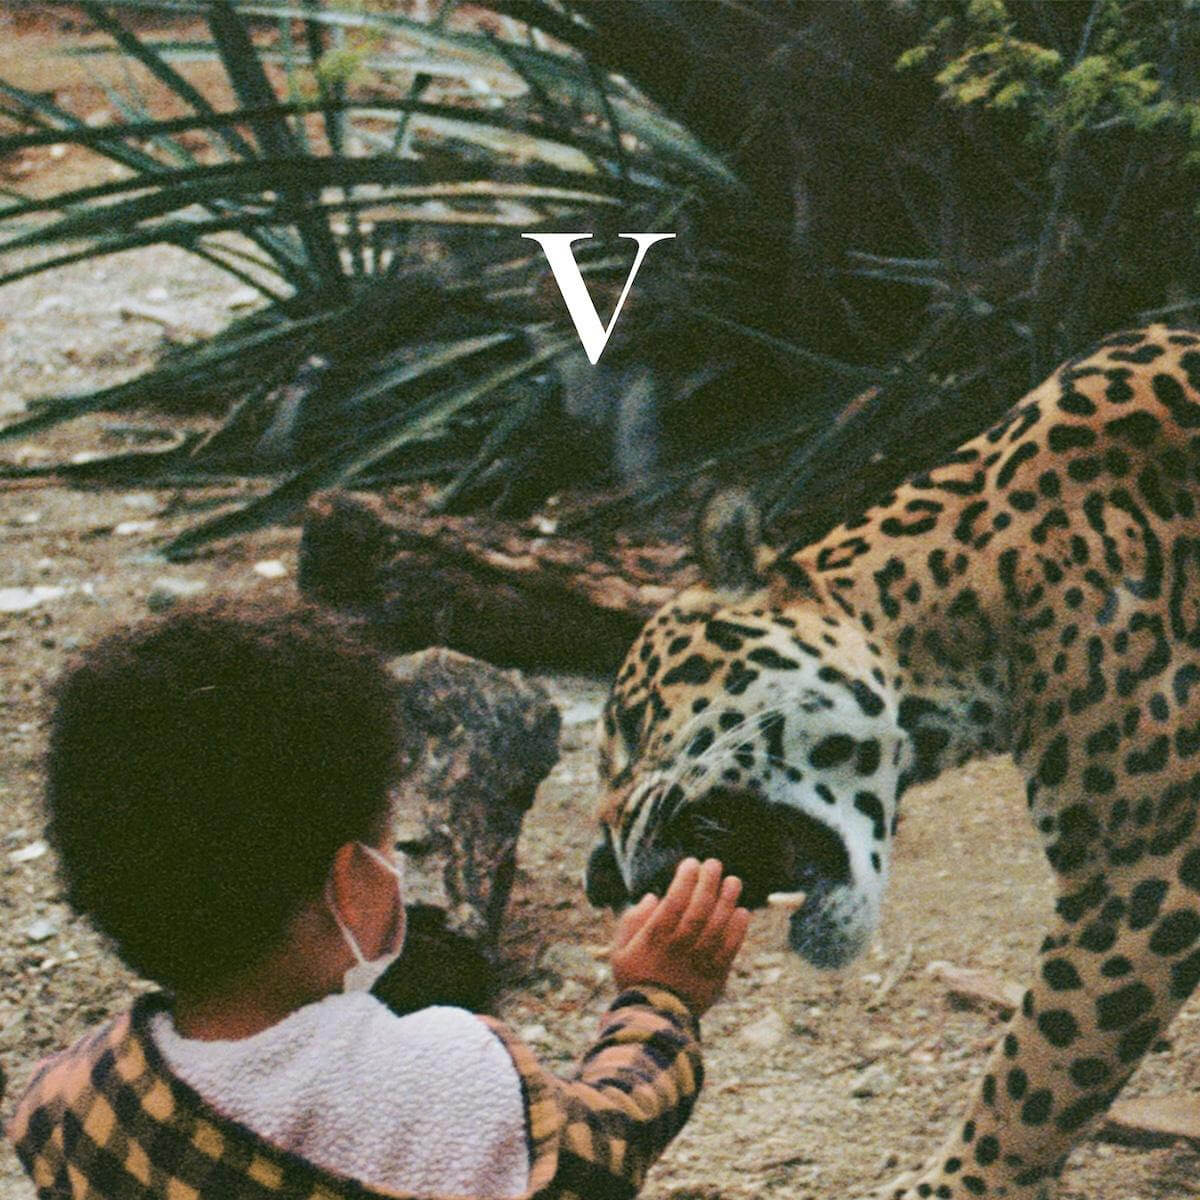 V by Unknown Mortal Orchestra album review by Lauren Rosier for Northern Transmissions